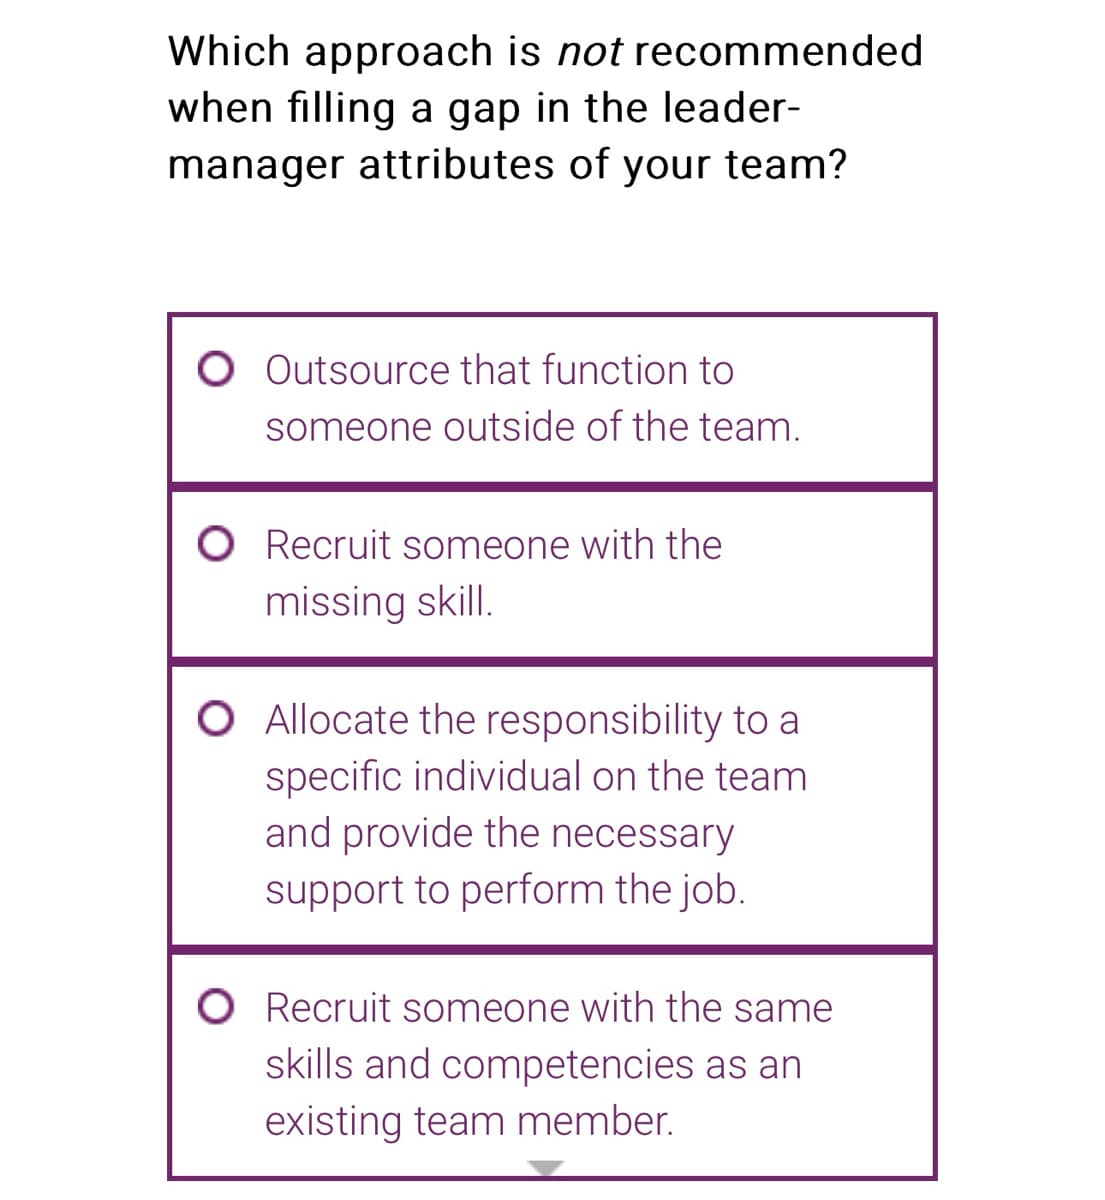 Which approach is not recommended
when filling a gap in the leader-
manager attributes of your team?
Outsource that function to
someone outside of the team.
O Recruit someone with the
missing skill.
O Allocate the responsibility to a
specific individual on the team
and provide the necessary
support to perform the job.
O Recruit someone with the same
skills and competencies as an
existing team member.